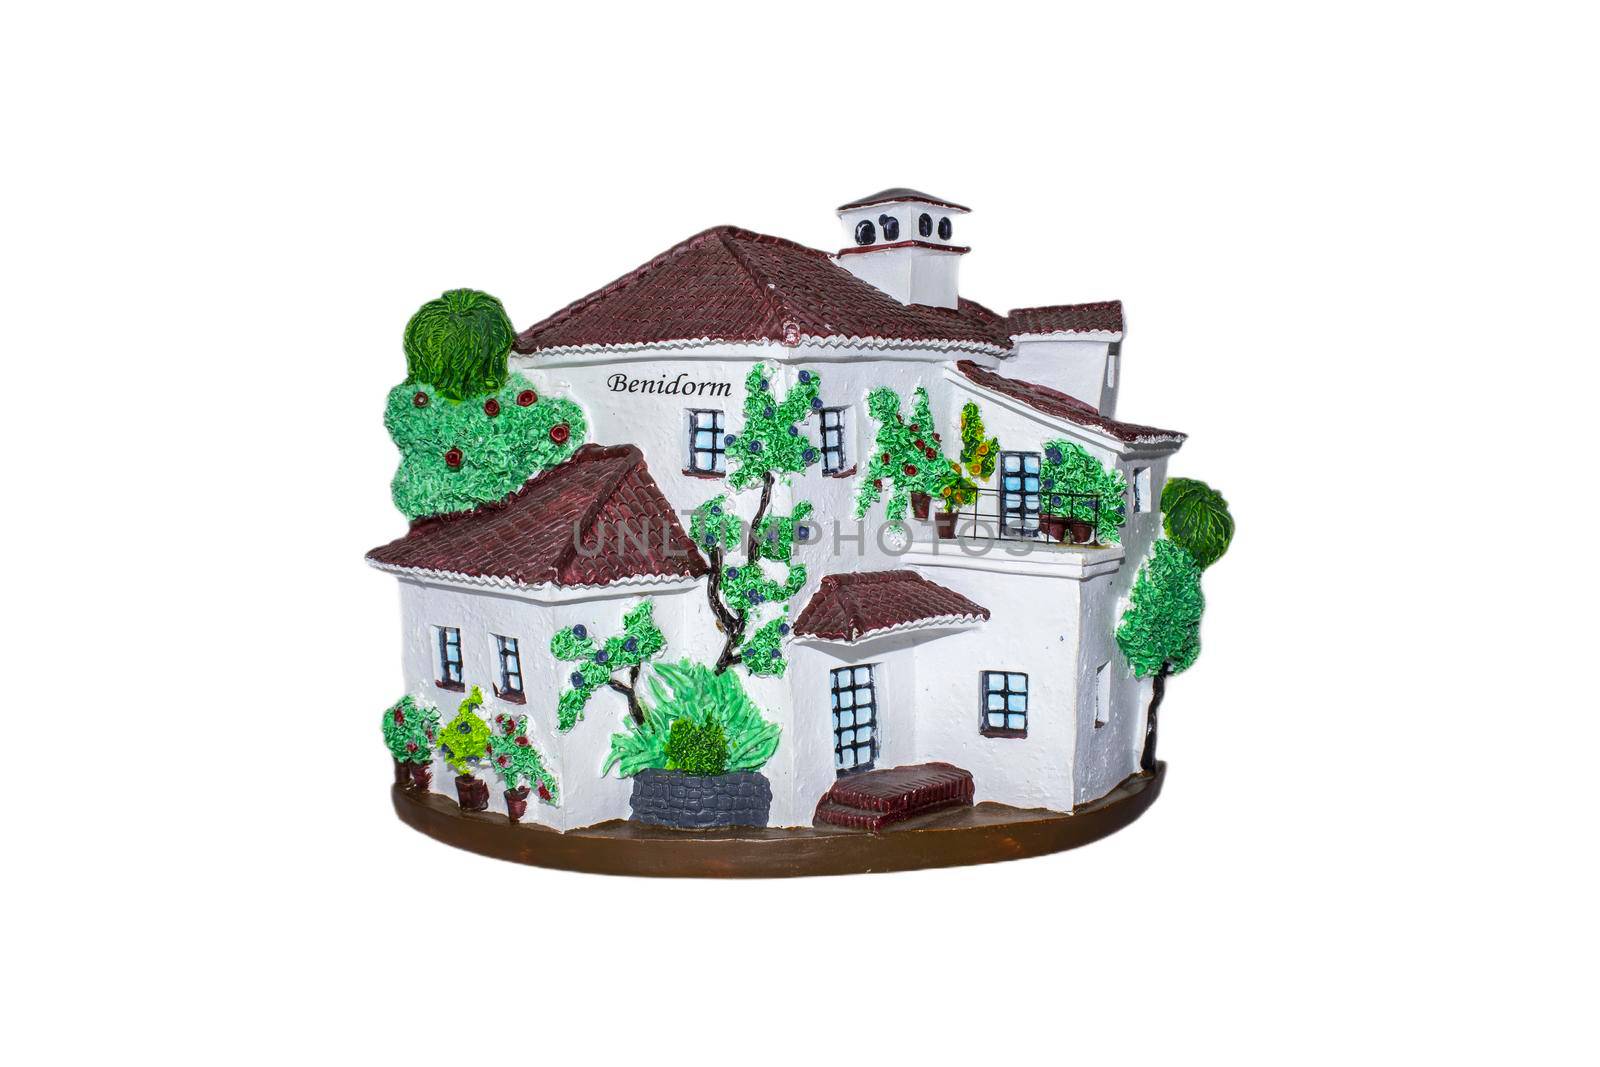 A decorative house shaped souvenir from Benidorm, Spain, on a white background